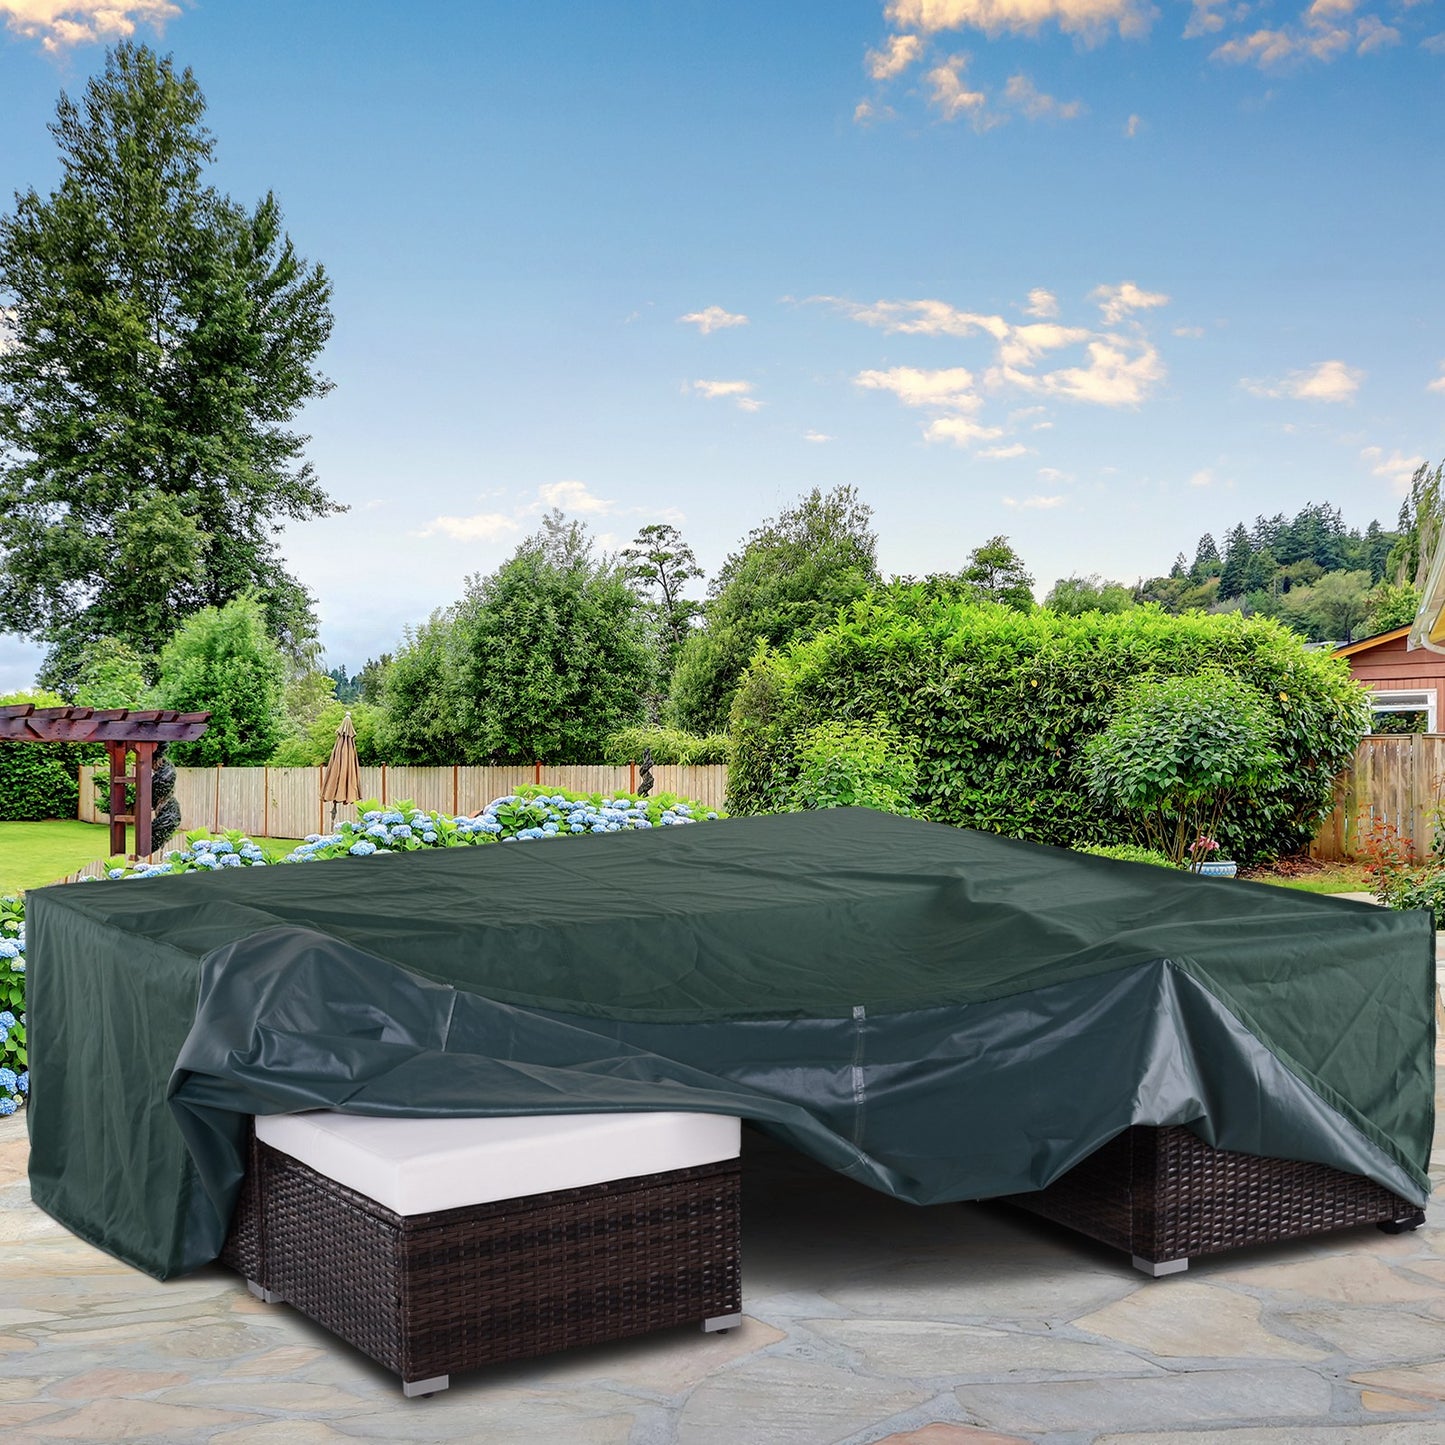 Outsunny Patio Furniture Set Cover Large, 600D Oxford Square Waterproof, 230L x 230W x 70H cm